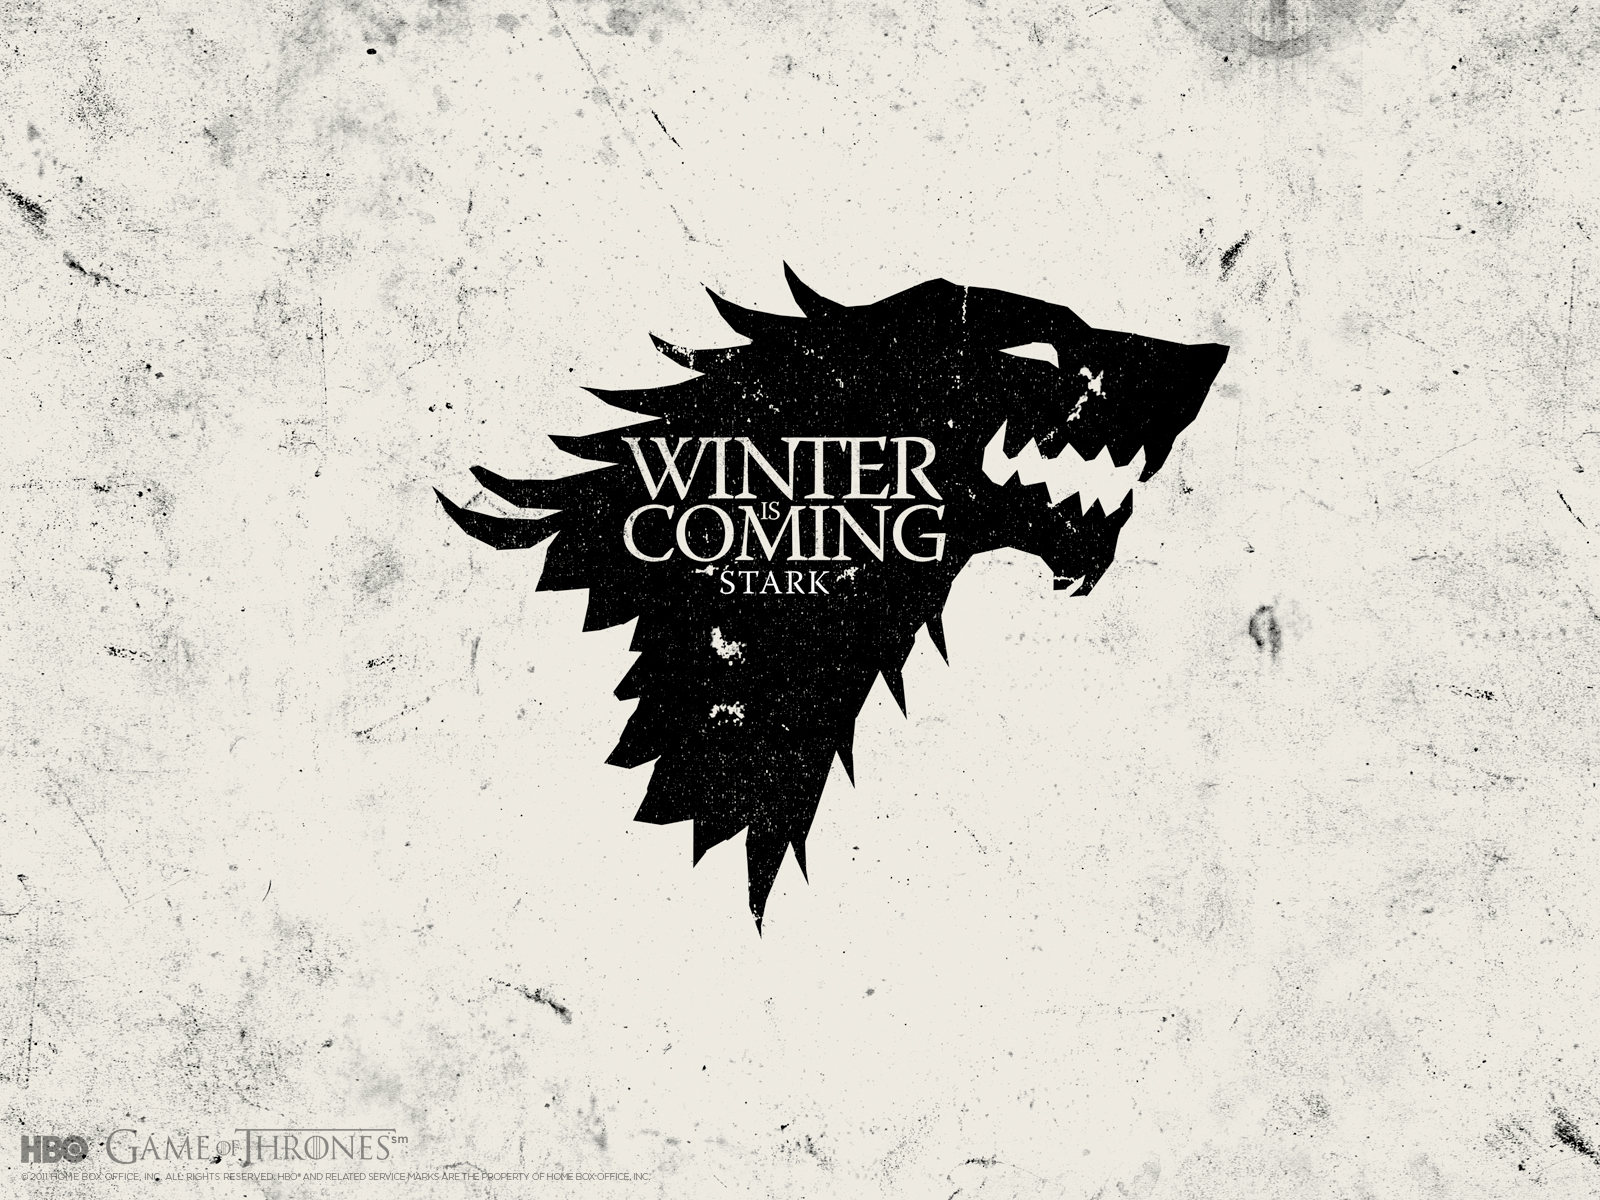 High Quality Game Of Thrones Hbo Wallpaper Full HD Pictures